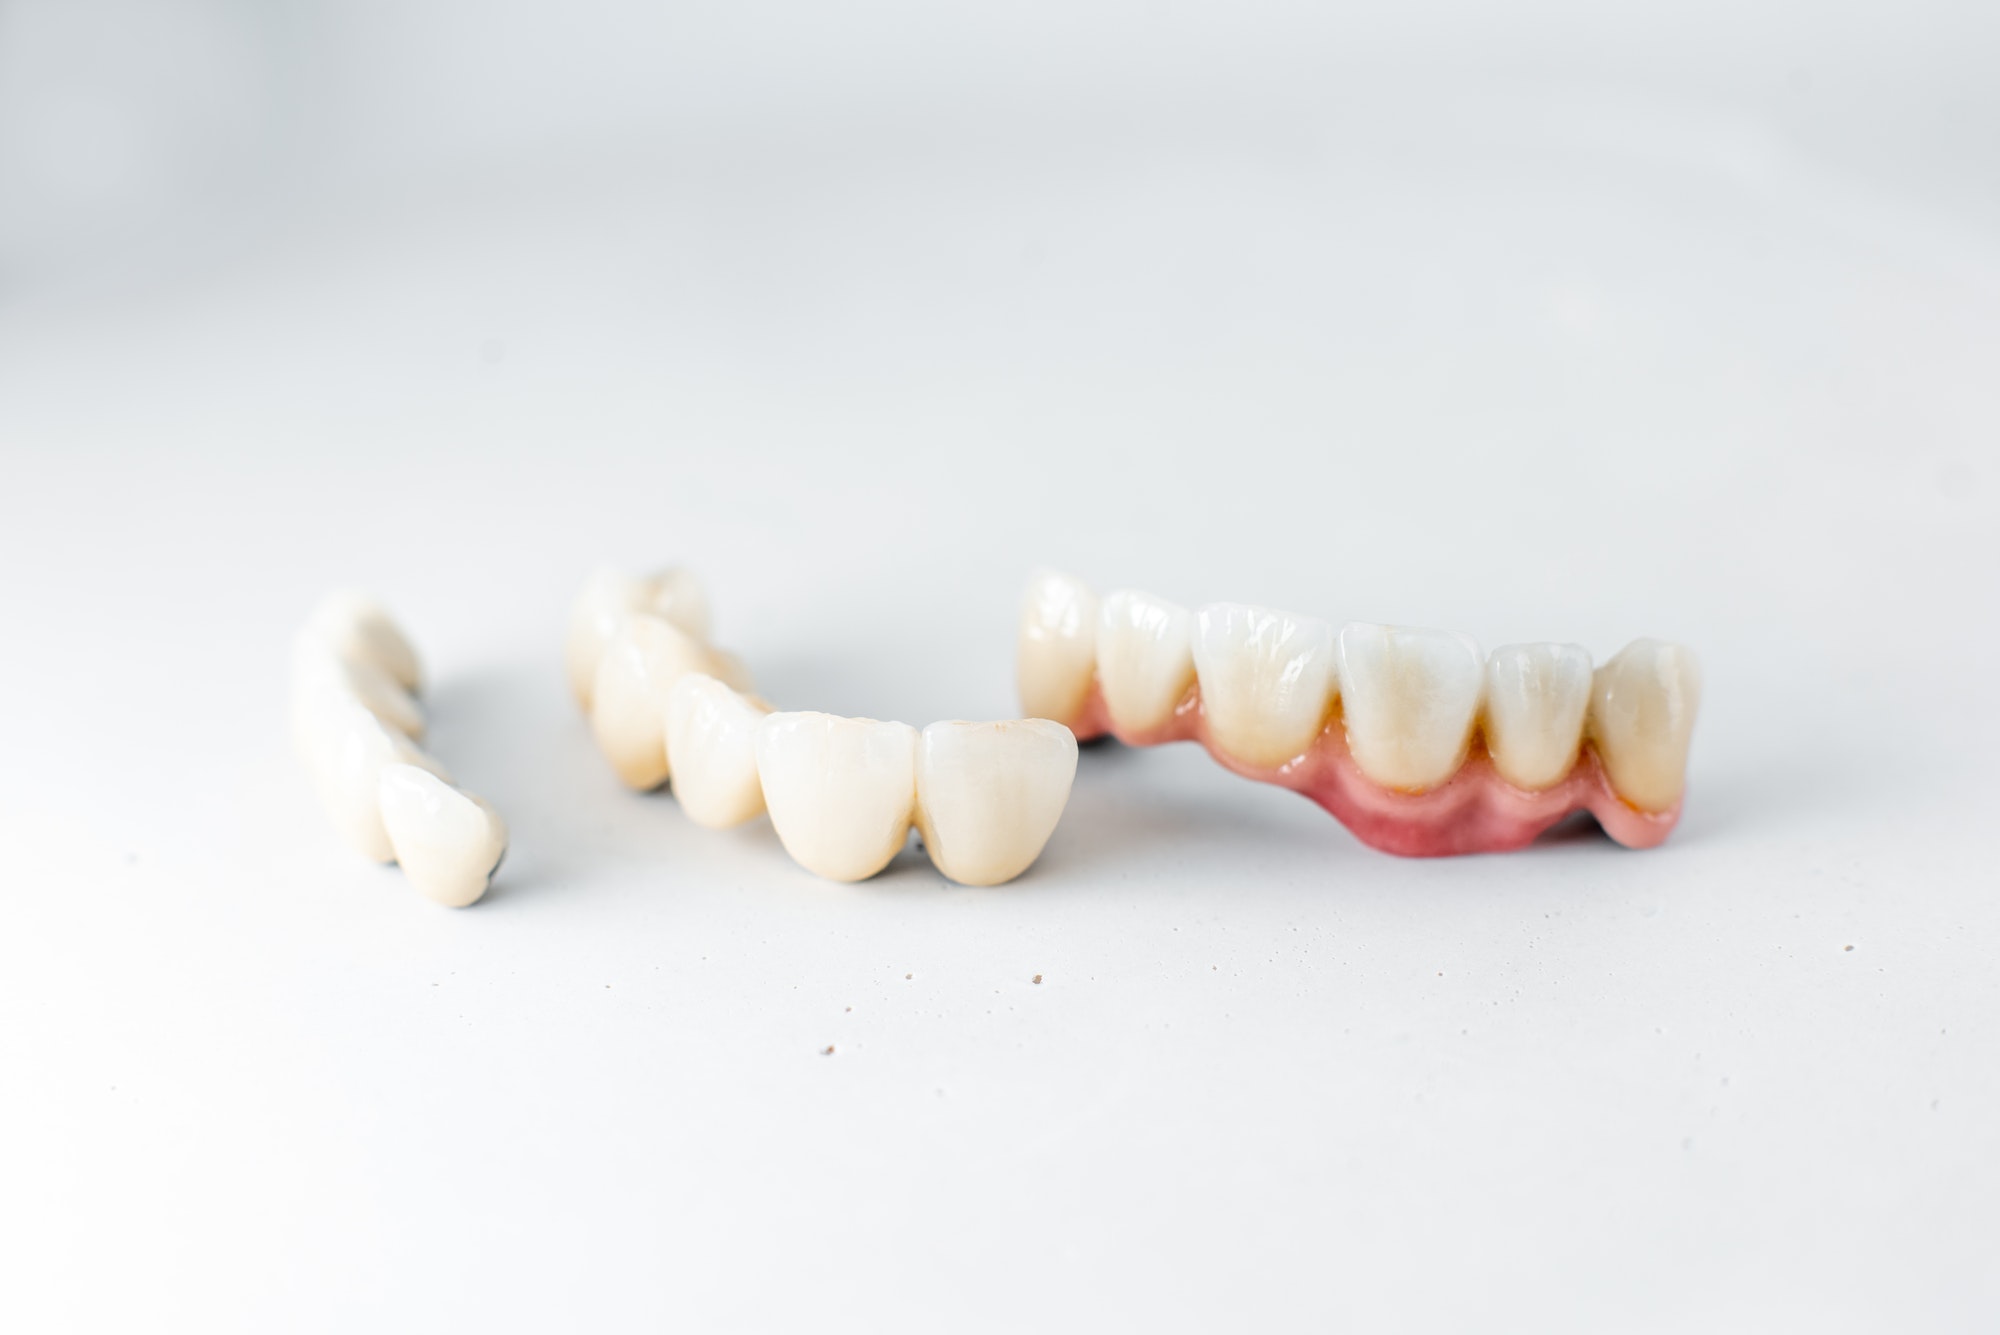 Dental crowns on the white background